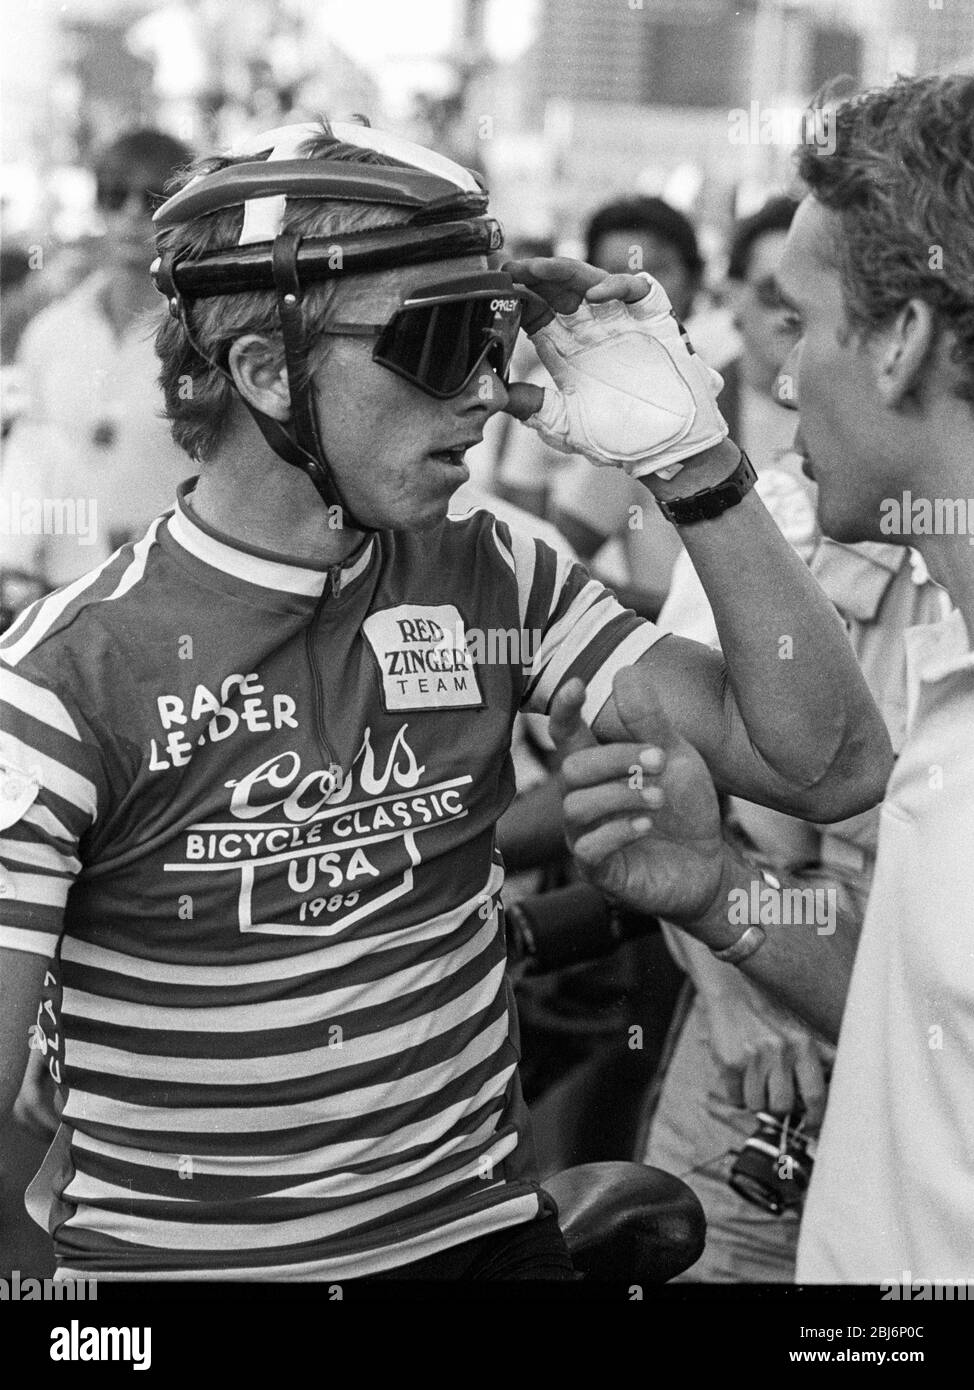 American cyclist Lemond adjusting his Oakley sunglasses during the Coors International Bicycle Classic bike race on August 15, 1985 in Denver, Photo by Francis Specker Stock Photo - Alamy